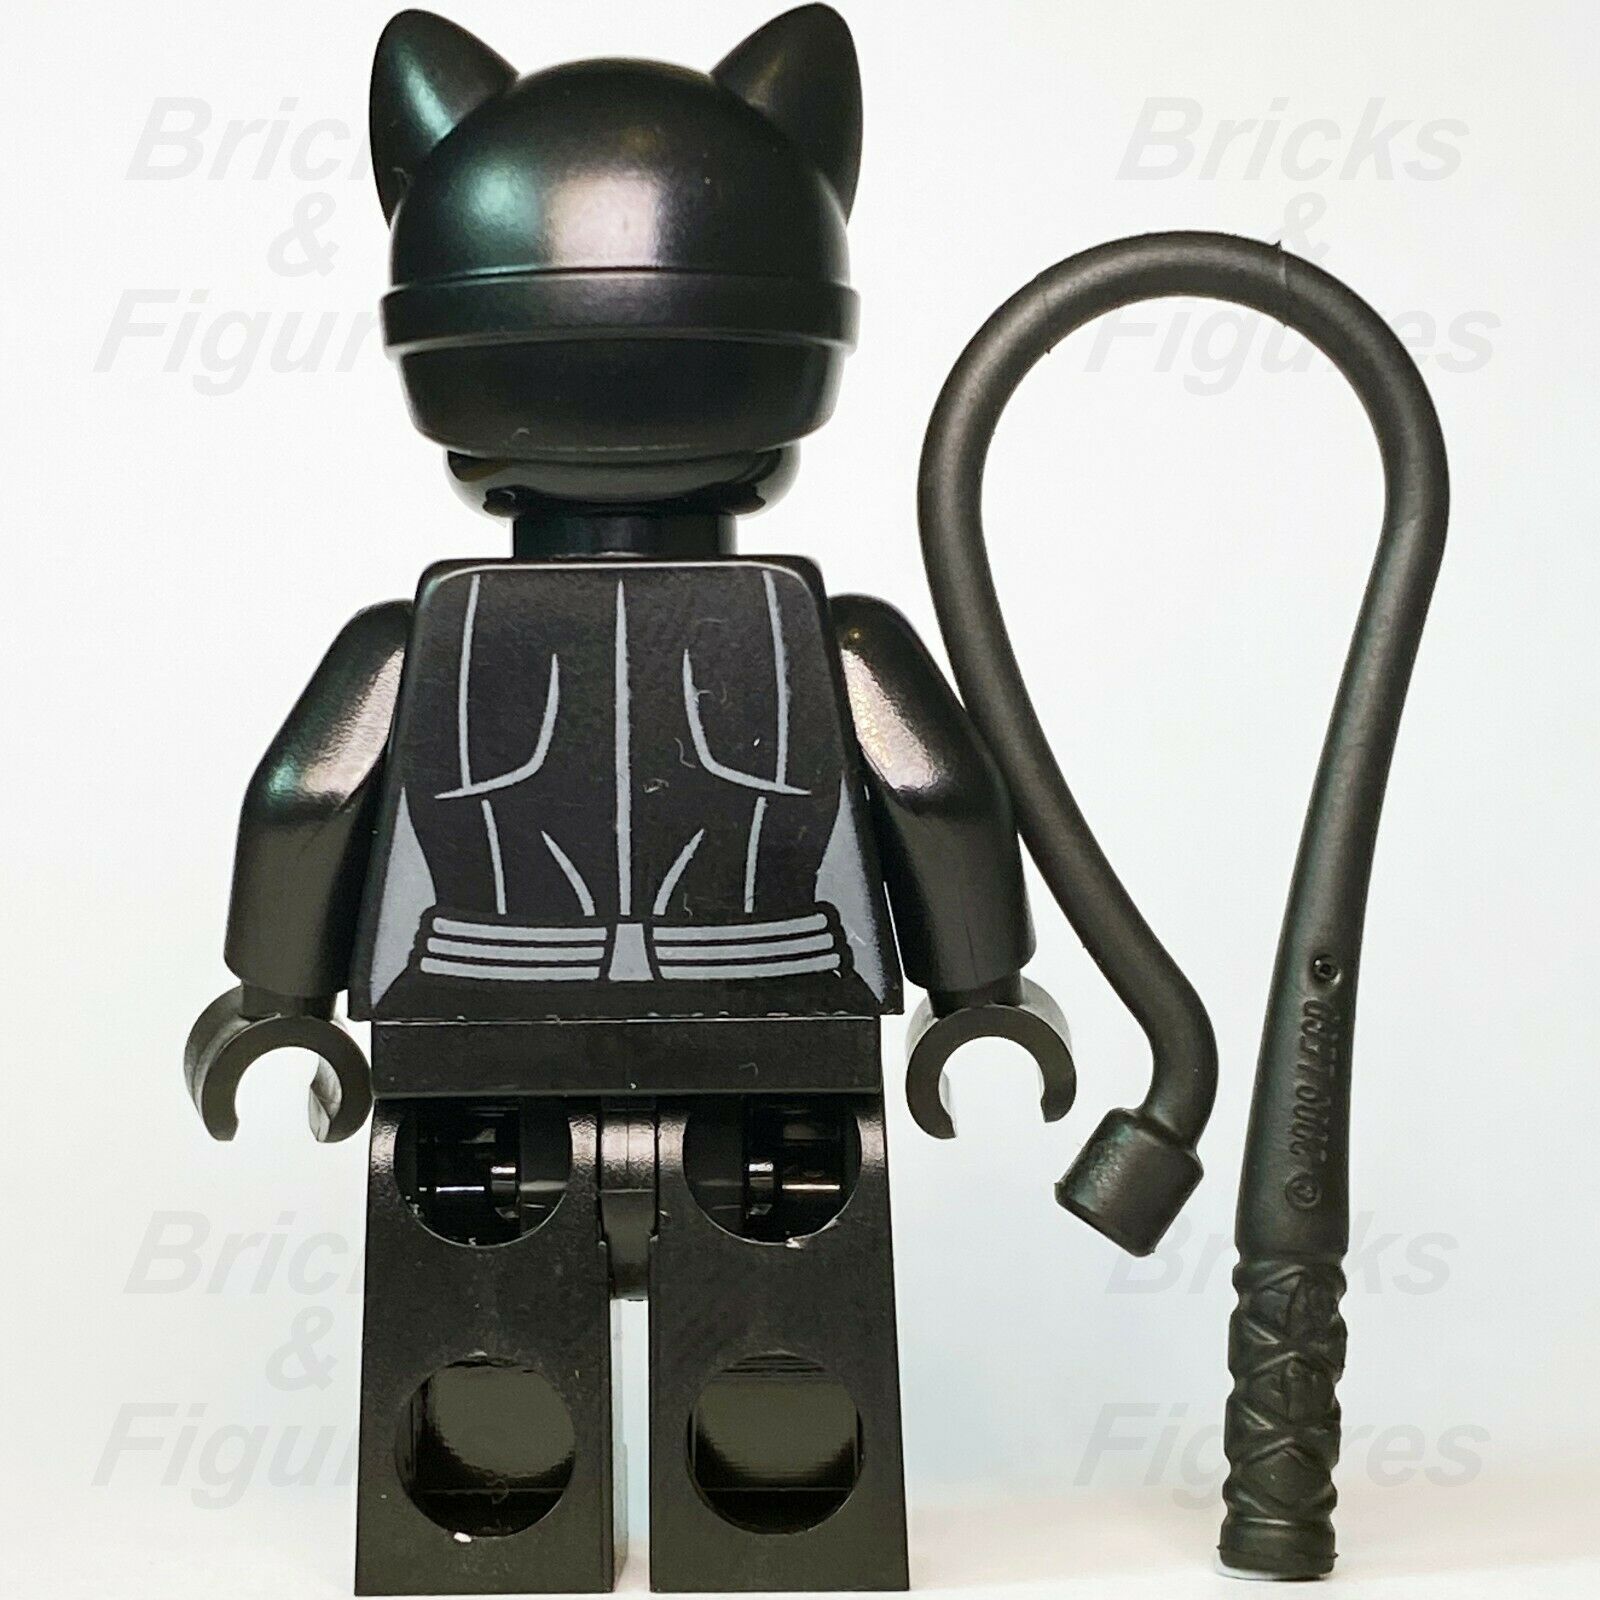 DC Super Heroes LEGO Catwoman with Red Goggles Batman 2 Minifigure 76122 - Bricks & Figures